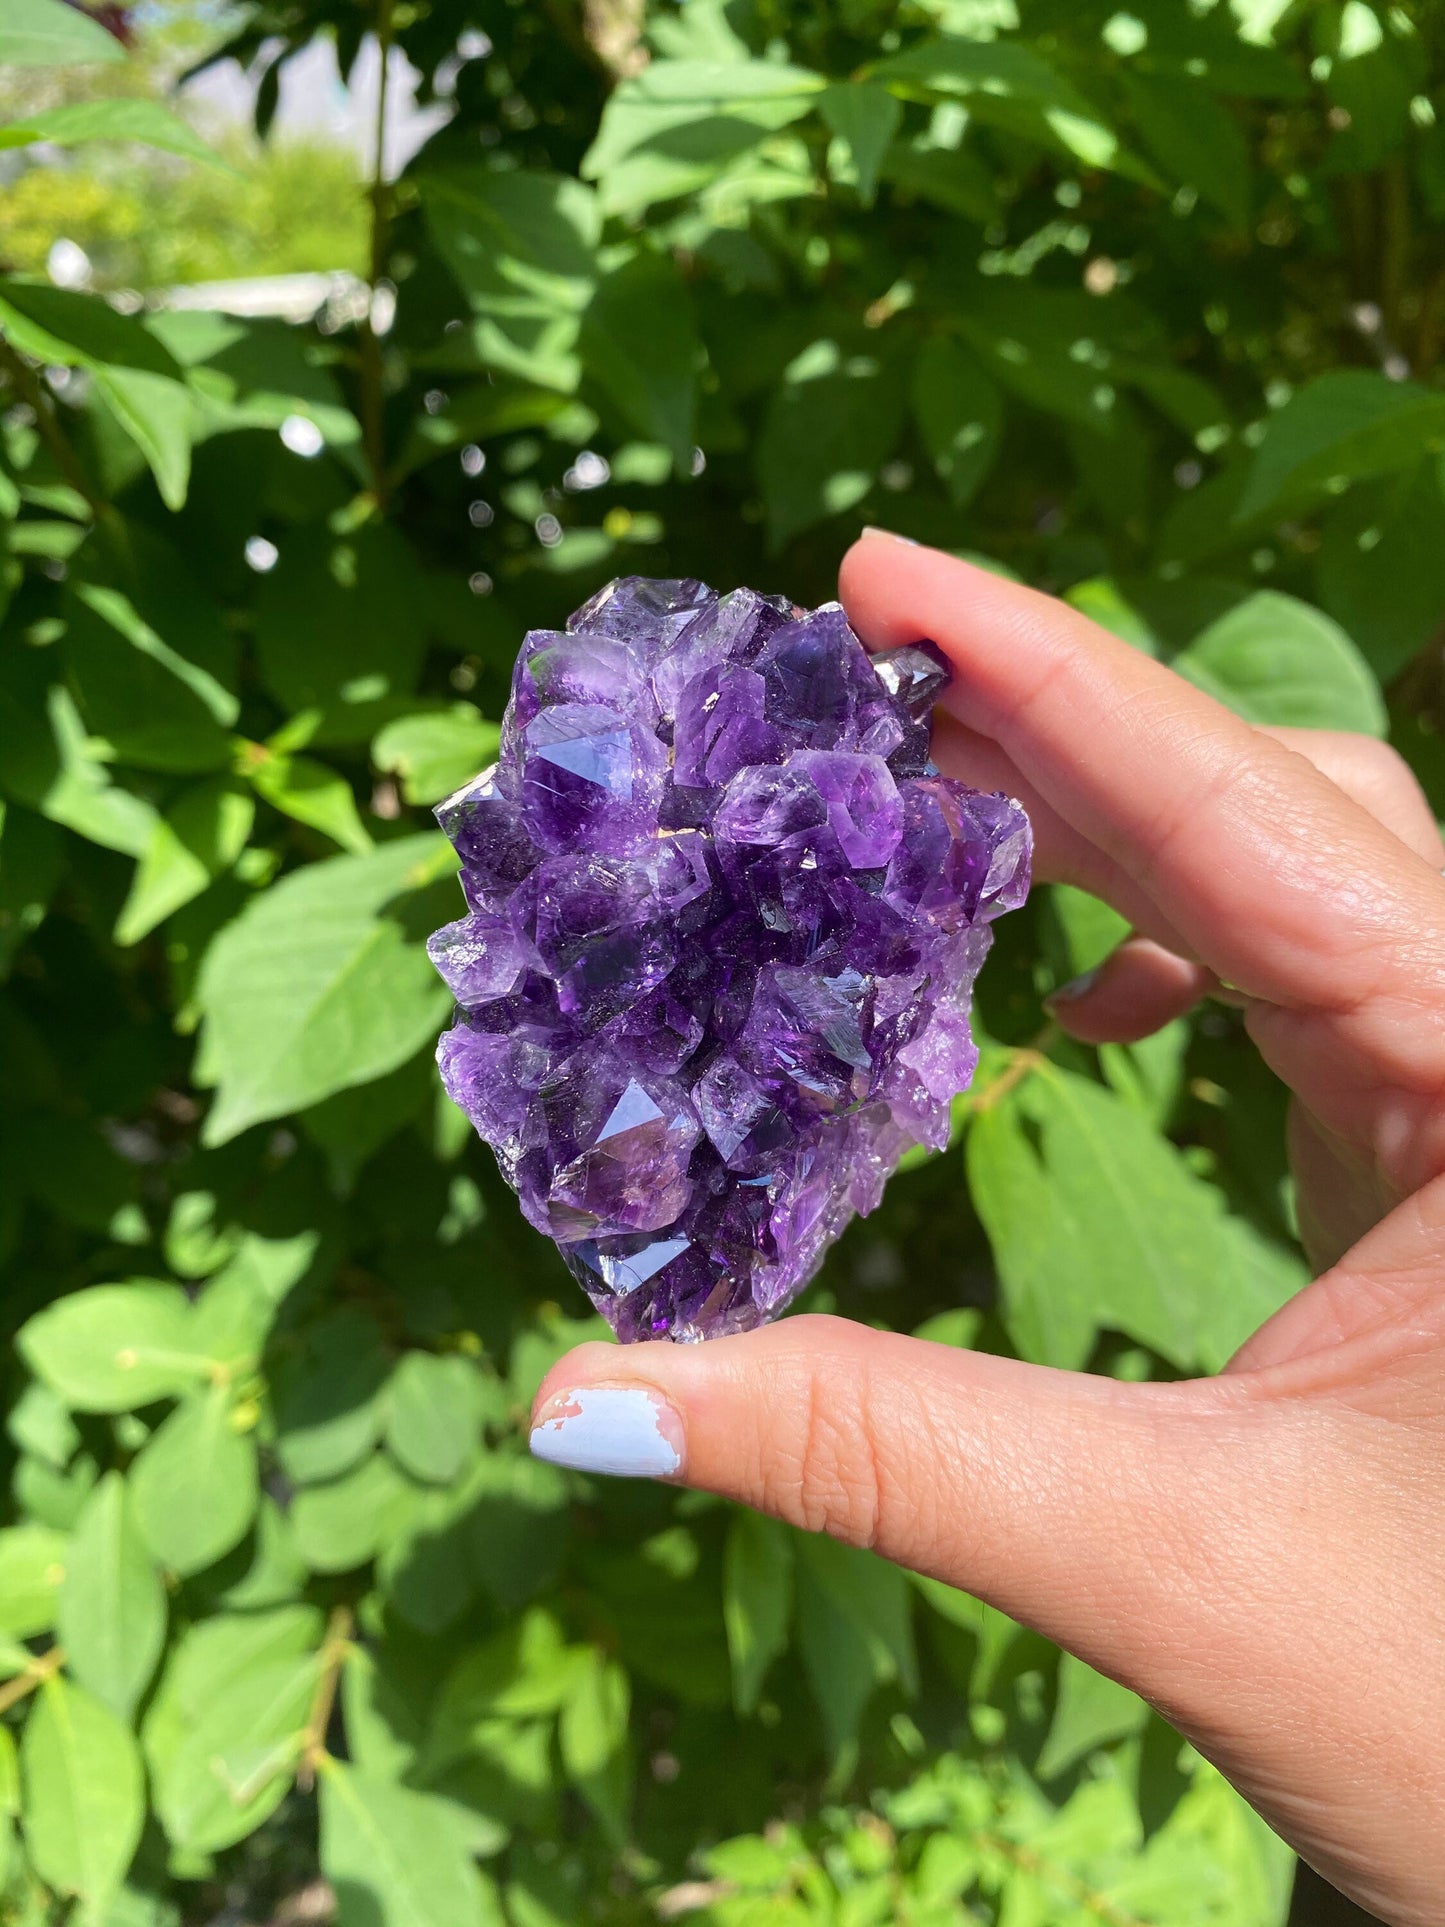 Extra Quality Druzy Amethyst Crystal Cluster / 2-3 inches across / Spiritual / Intuition / Calm and Relaxing Stone